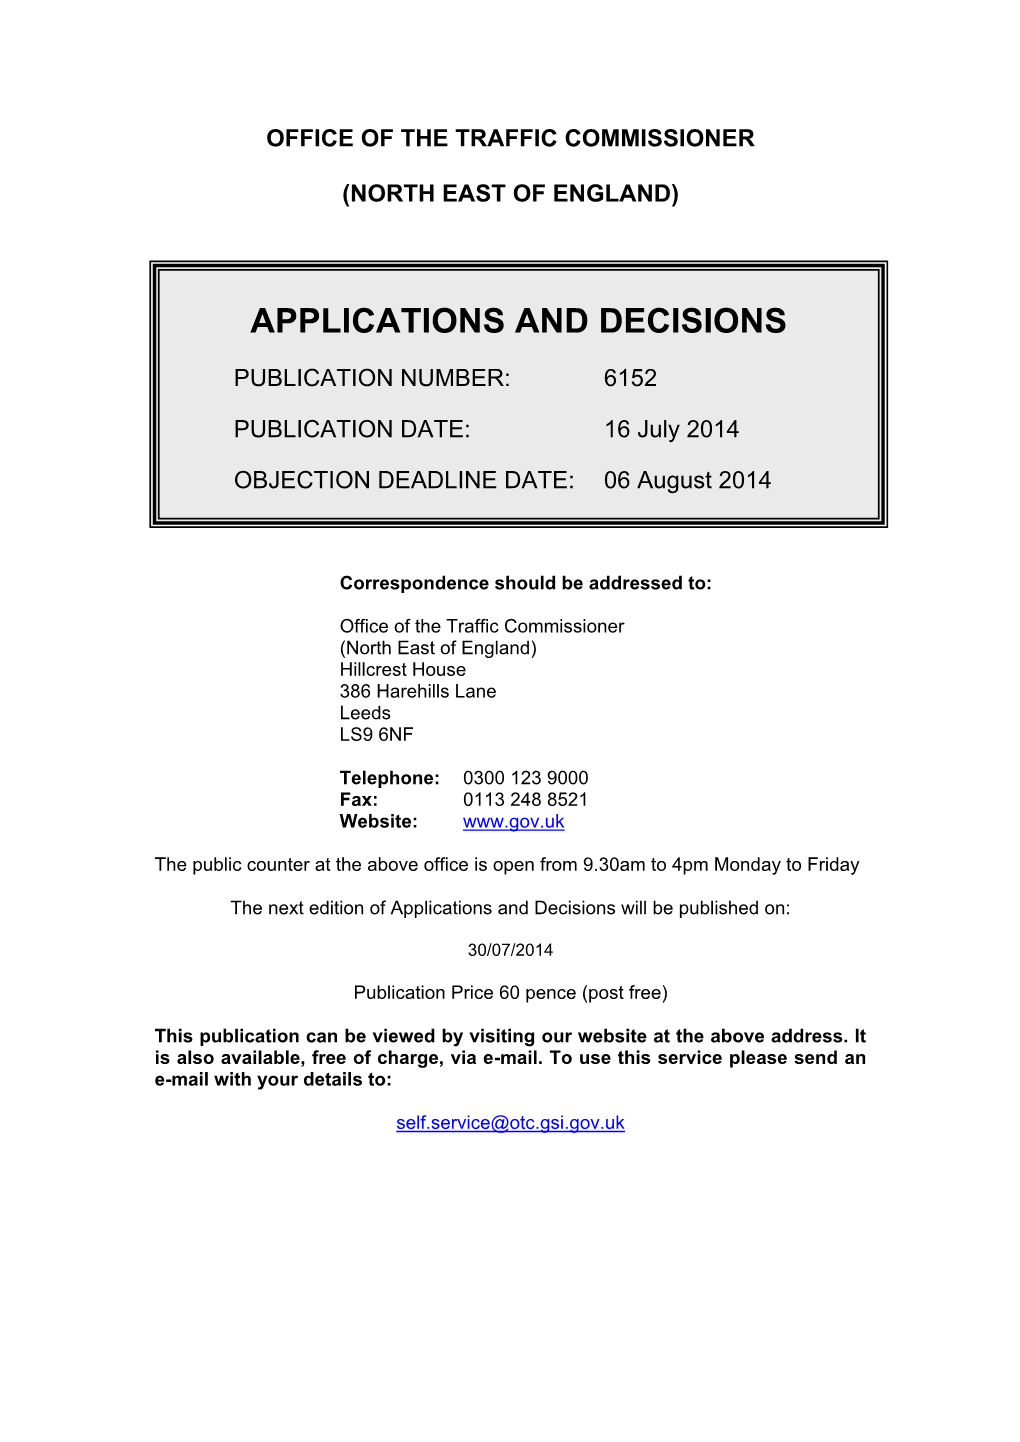 Applications and Decisions 16 July 2014